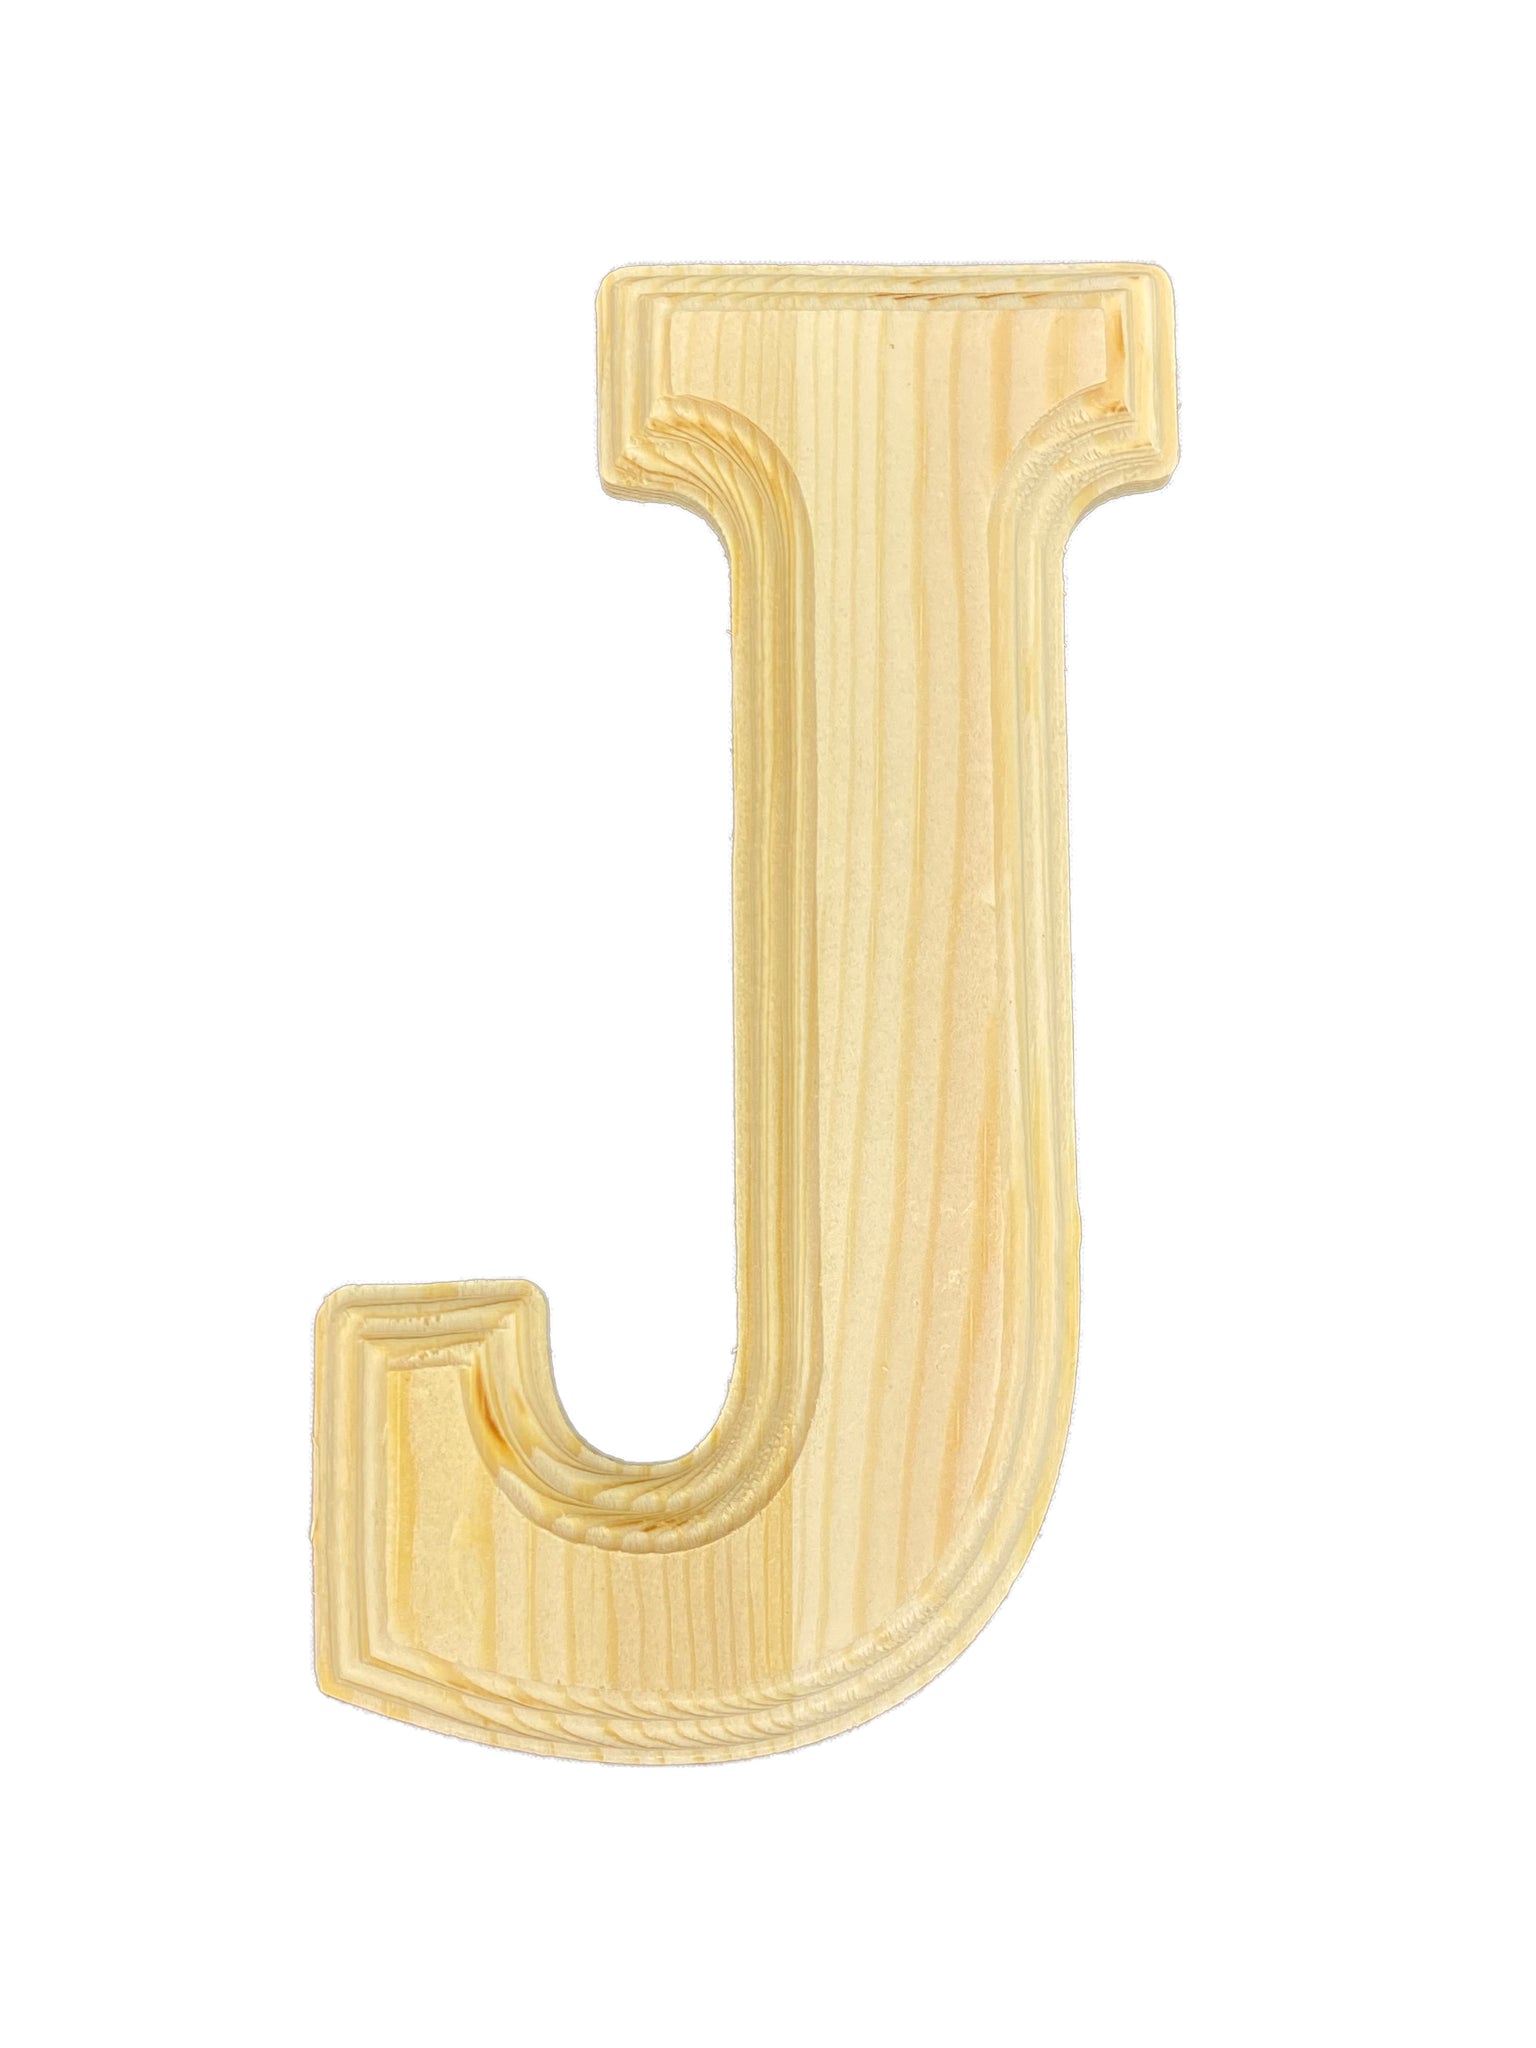 Crafts Central Pine Wood Beveled Wooden Alphabet Letters for Arts & Crafts, Decorations and DIY (J)